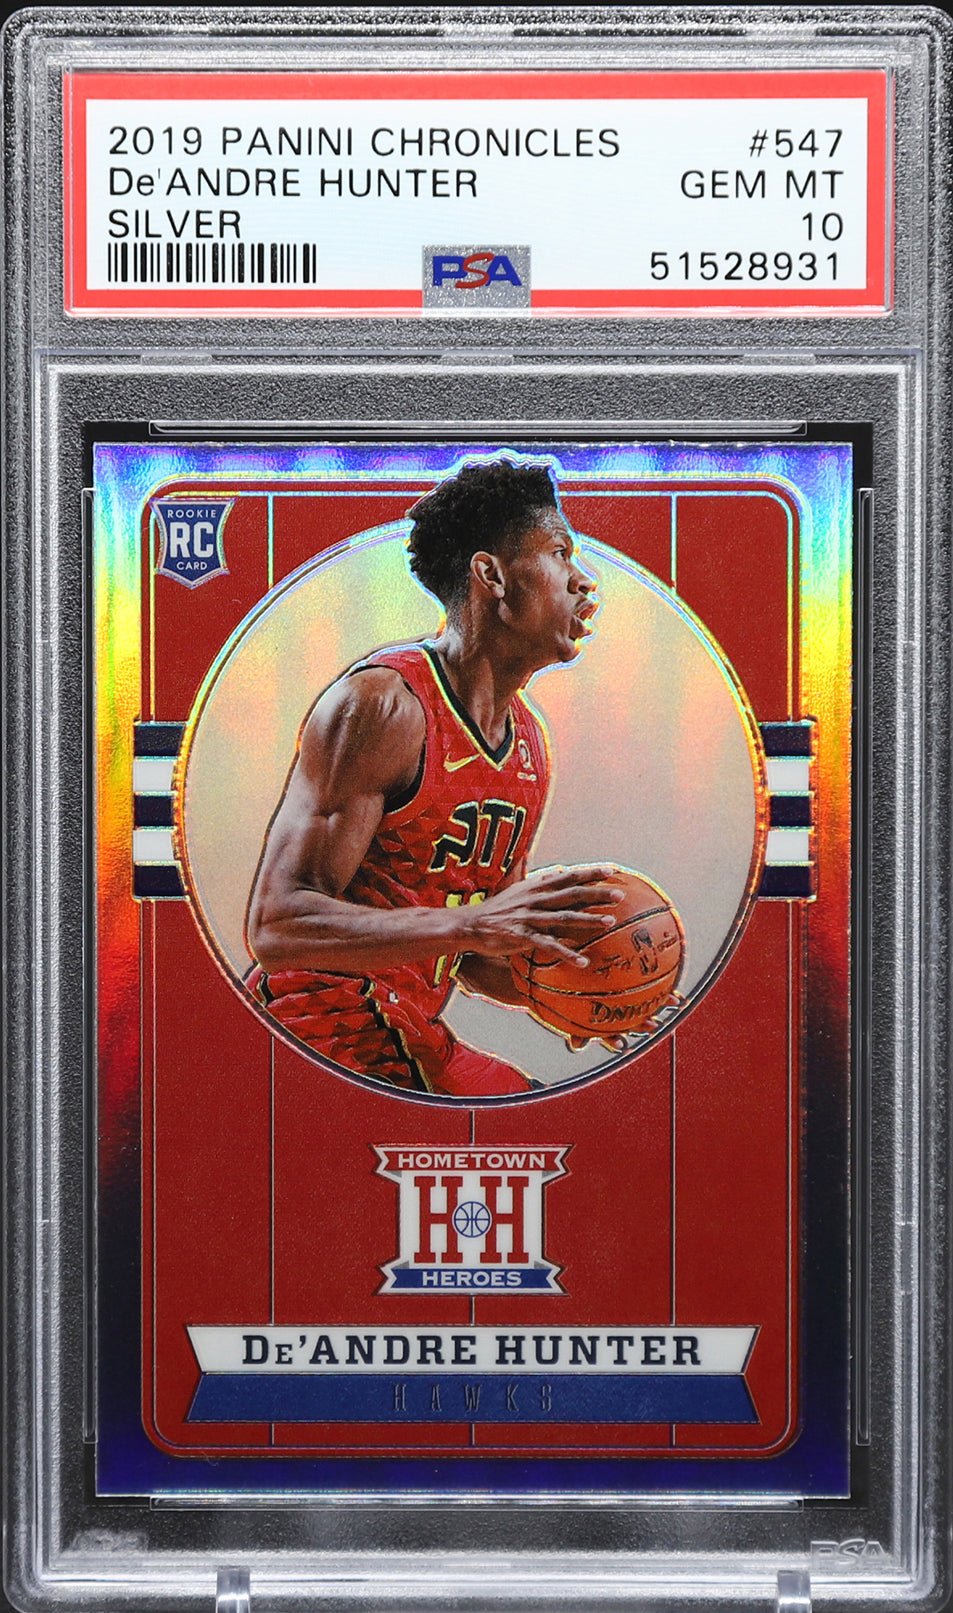 DE'ANDRE HUNTER PSA 10 2019-20 Panini Chronicles Hometown Silver Prizm #547 Basketball Graded Cards Parallel RC - Hobby Gems